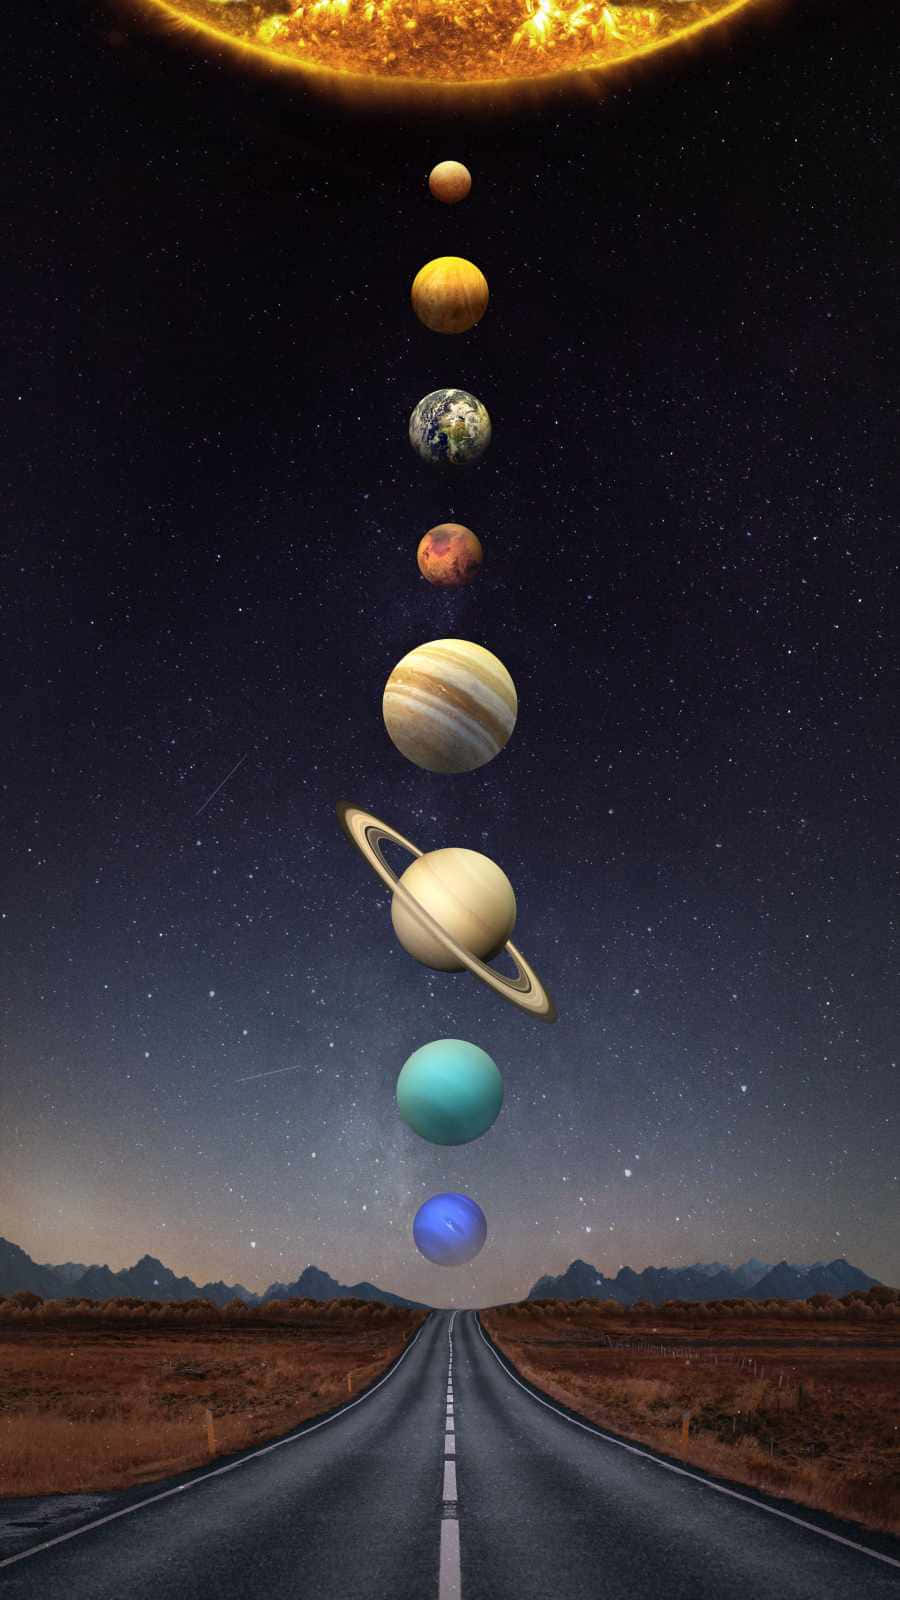 Road With Solar System Planets Wallpaper